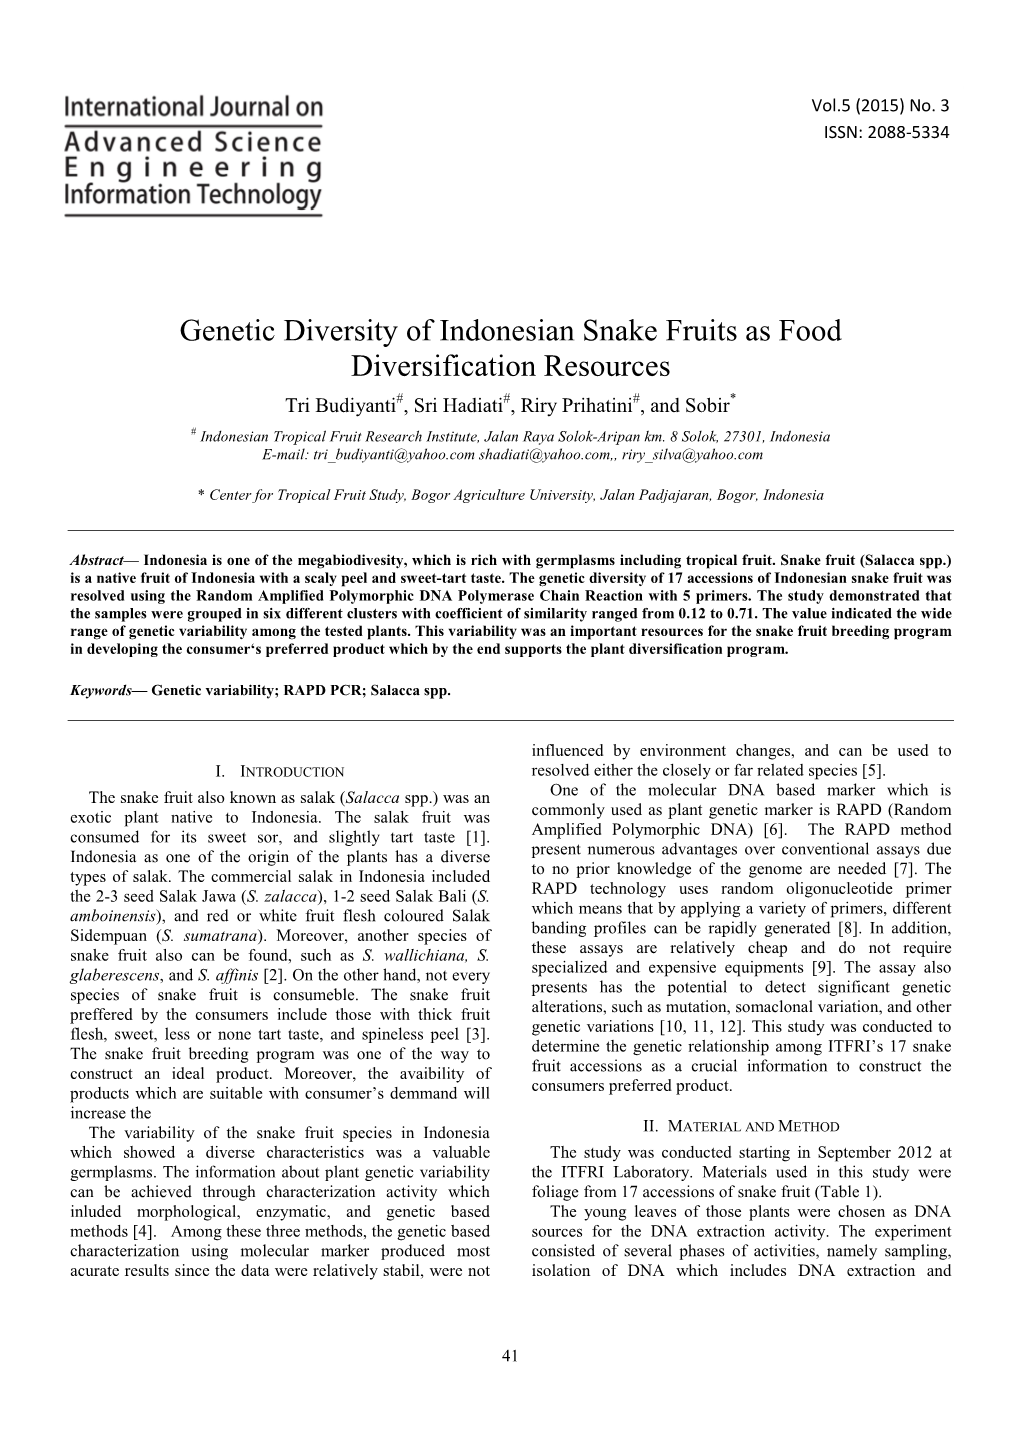 Genetic Diversity of Indonesian Snake Fruits As Food Diversification